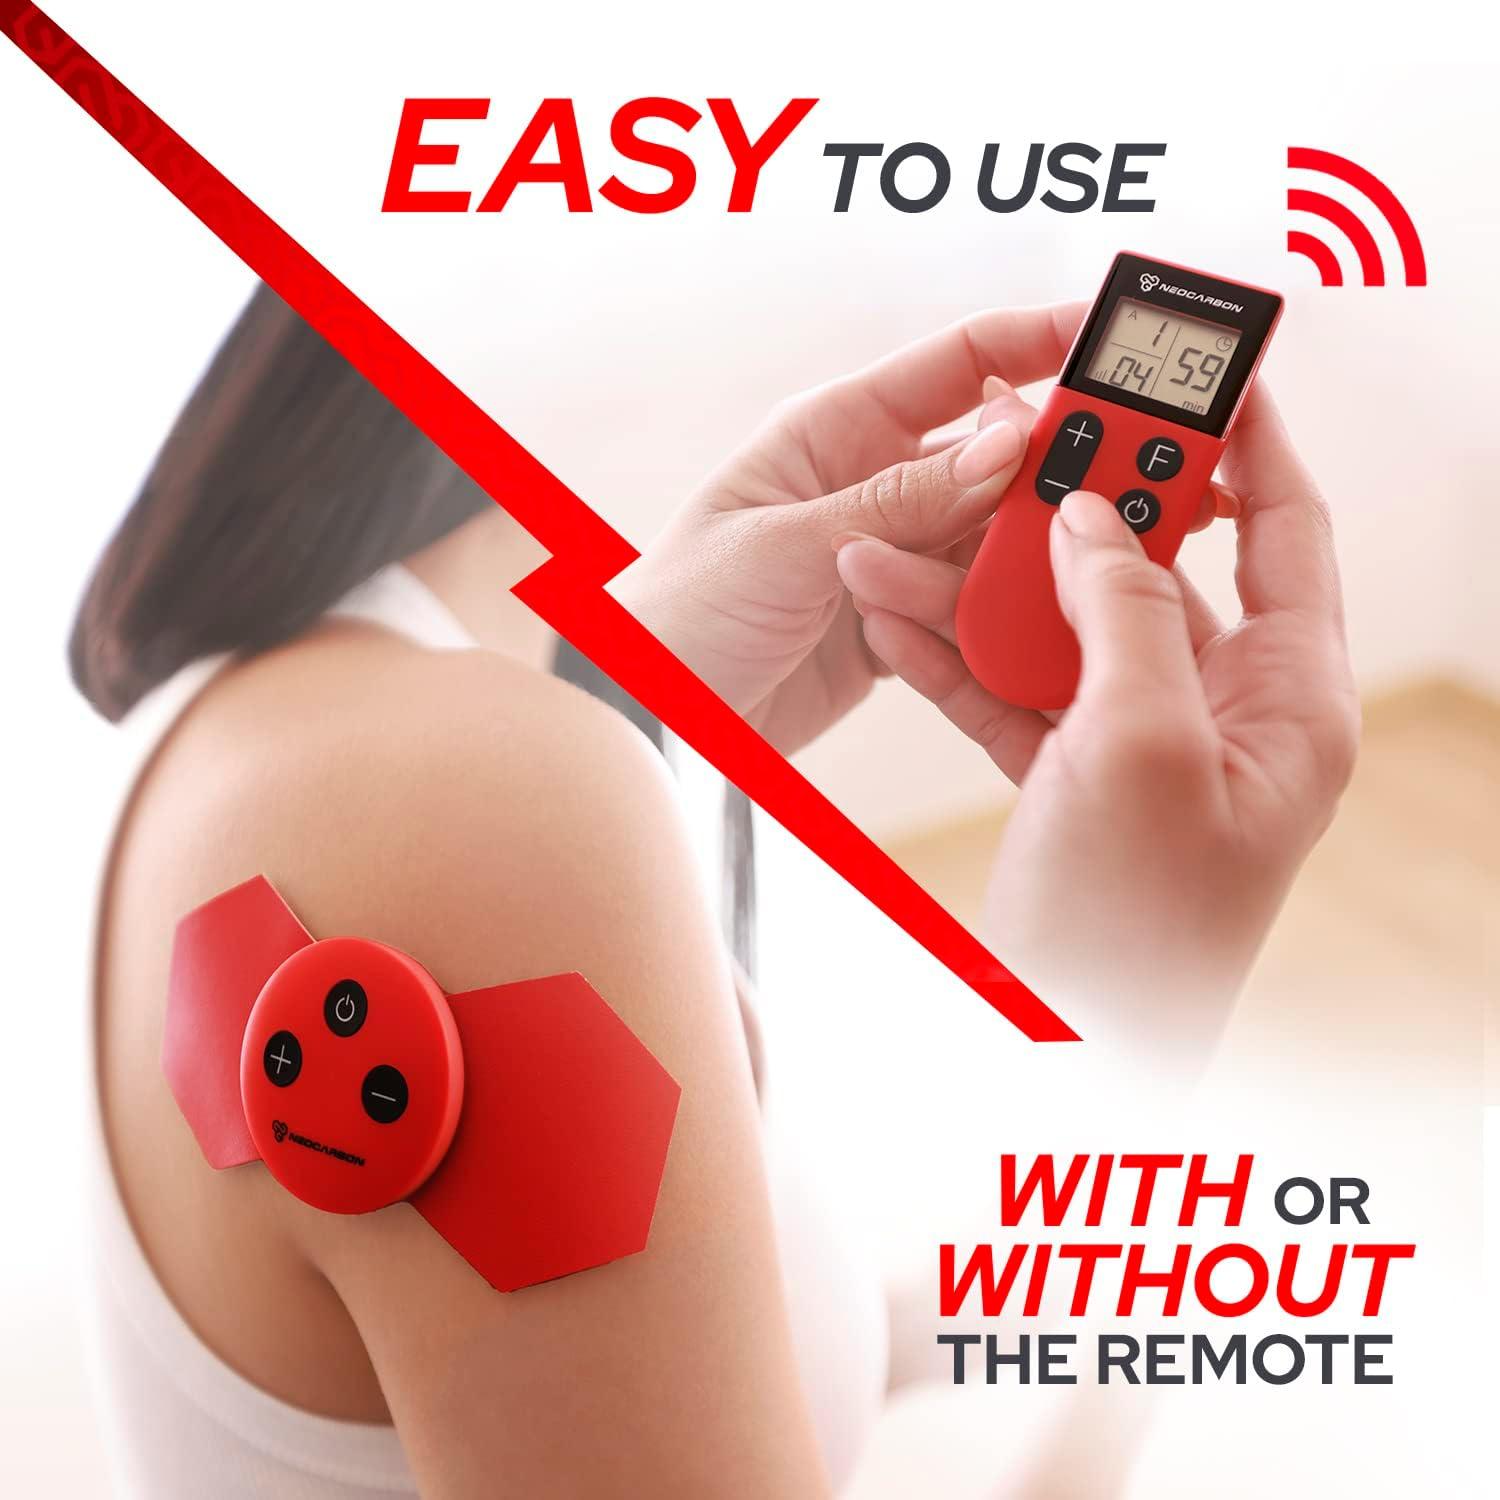 Wireless Tens Unit Pads Muscle Stimulator Rechargeable Pain Relief